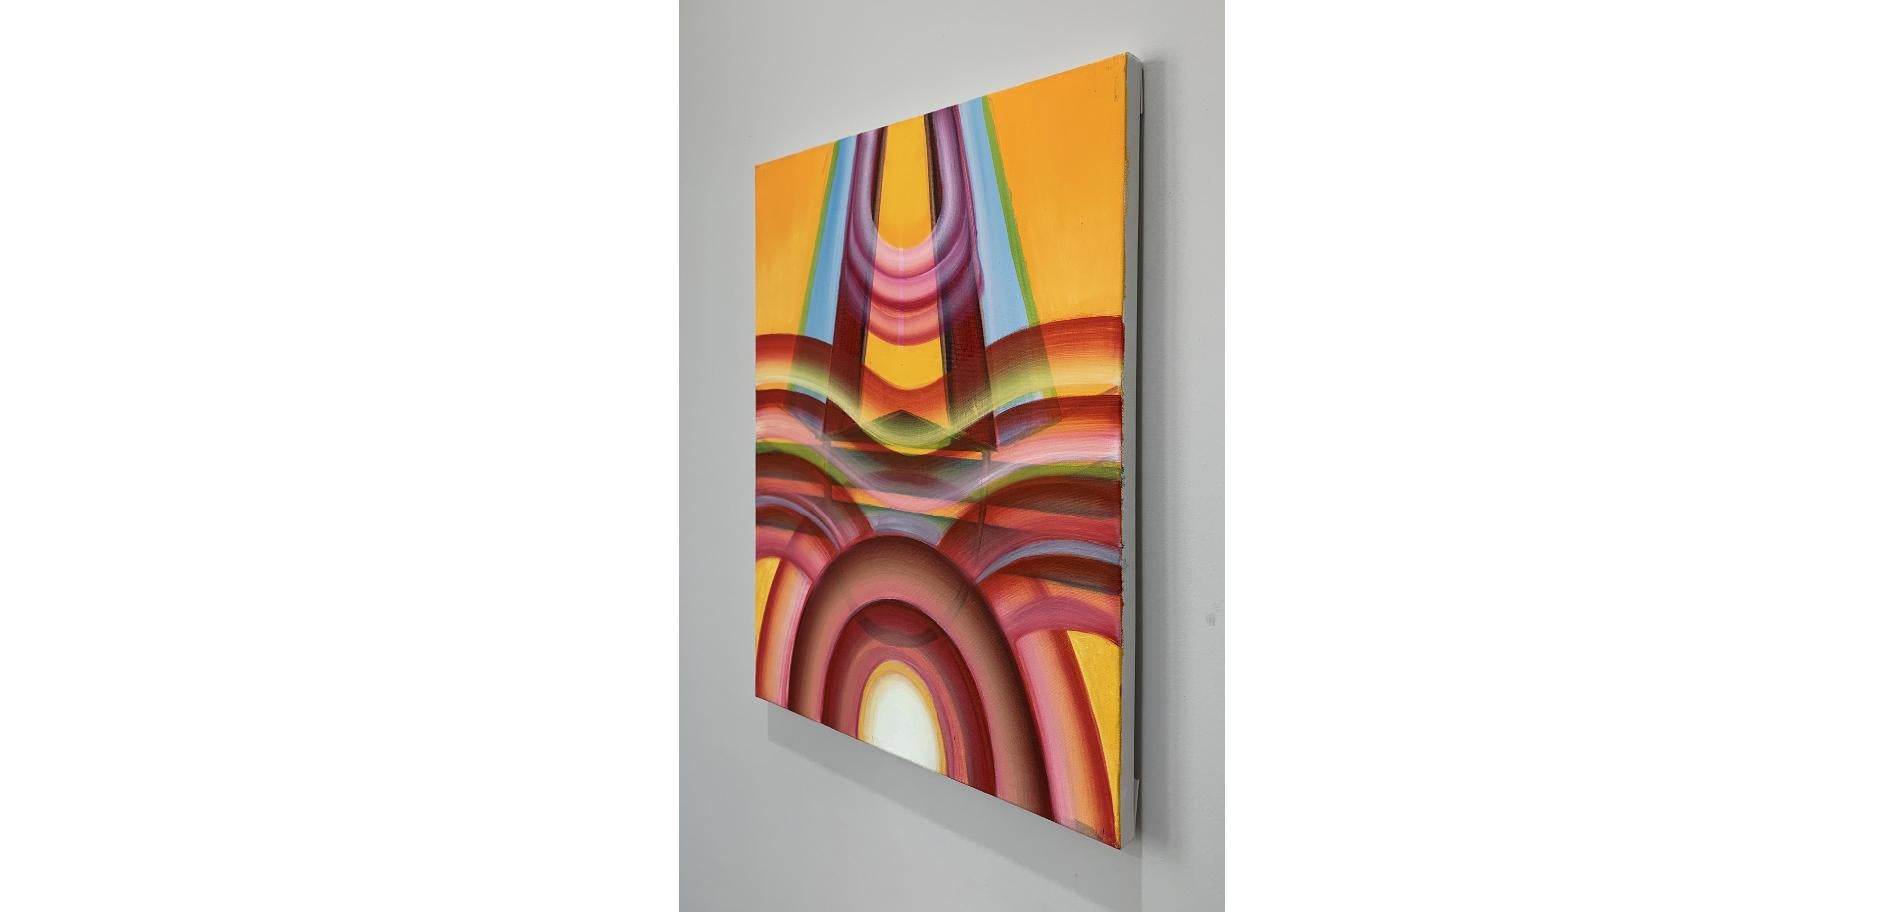 Oil on canvas, Abstract geometric pattern; minimalism; nonobjective art; golden yellow, light blue, pink, orange, red, burgundy; geometric abstraction

Hand-signed by artist
Framing available upon request
Certificate of authenticity available upon